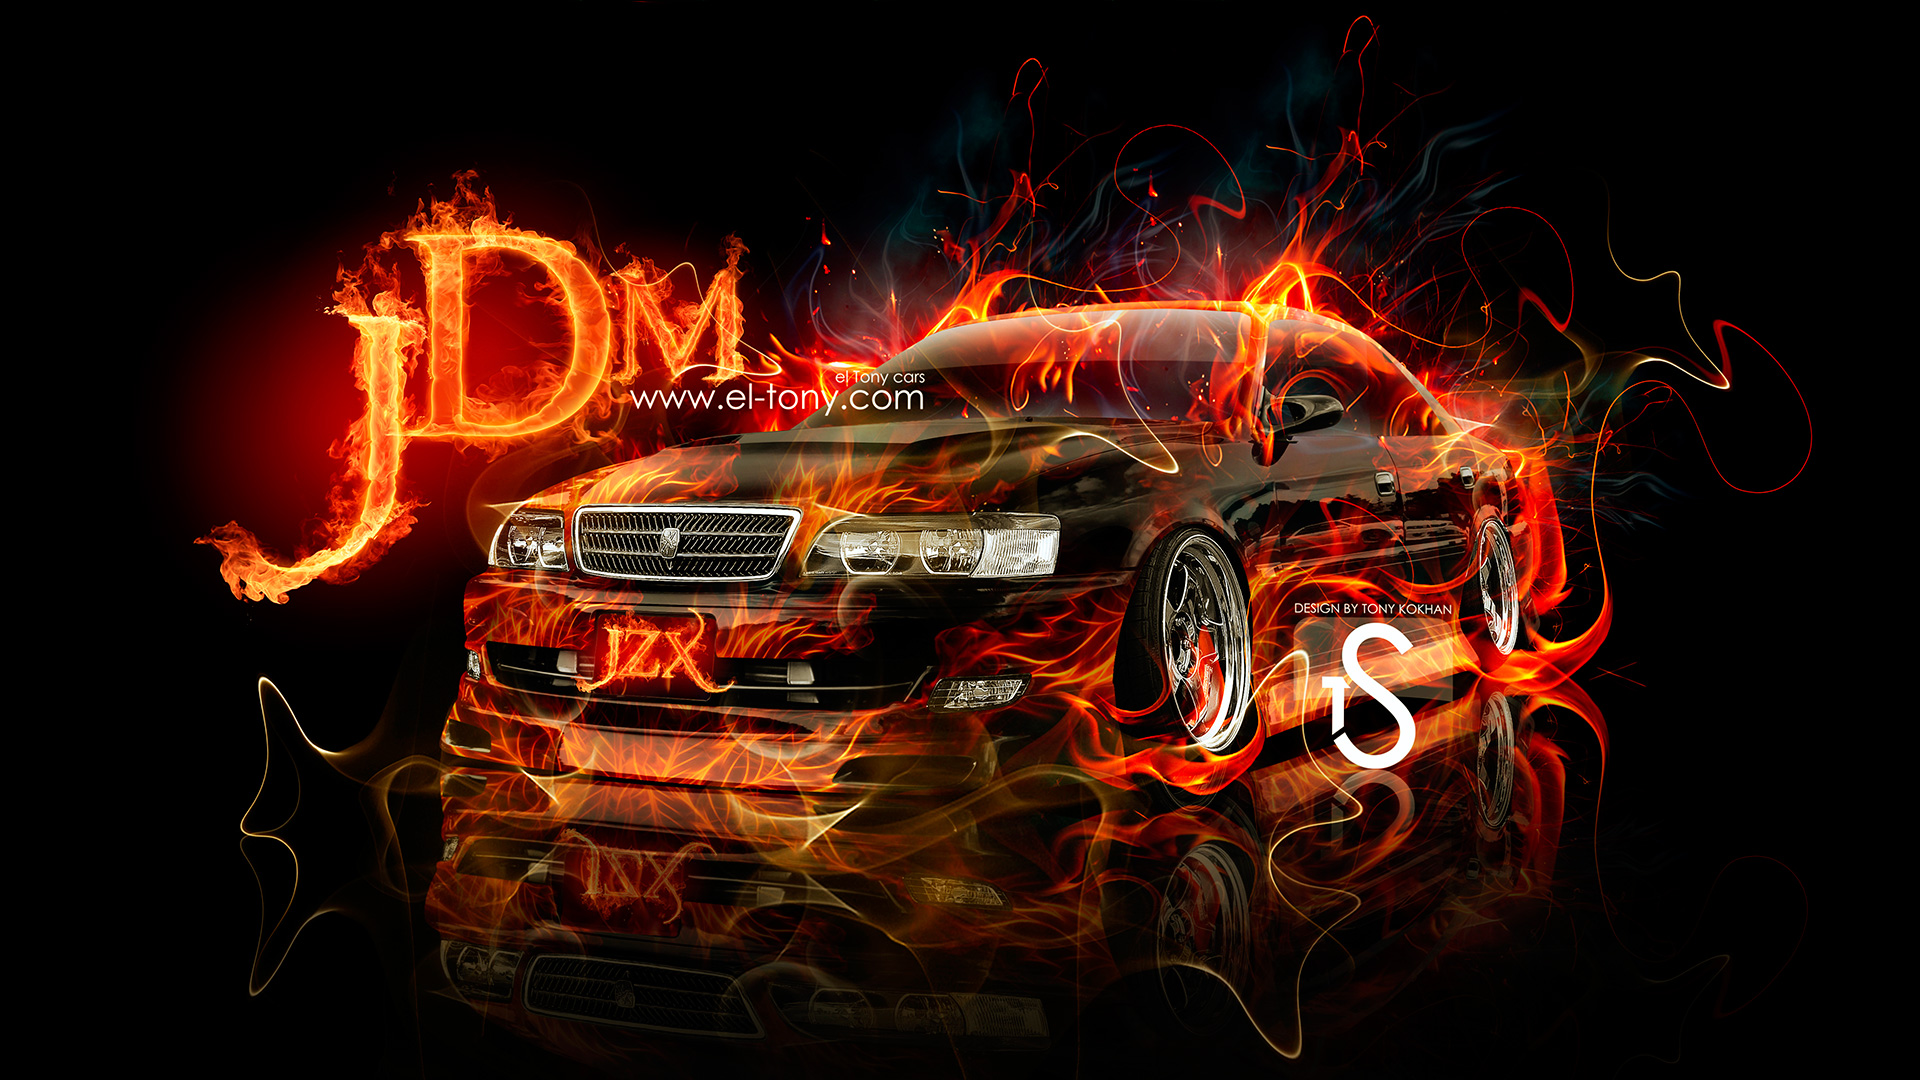 Chaser Jzx100 Jdm Side Fire Abstract Car Toyota